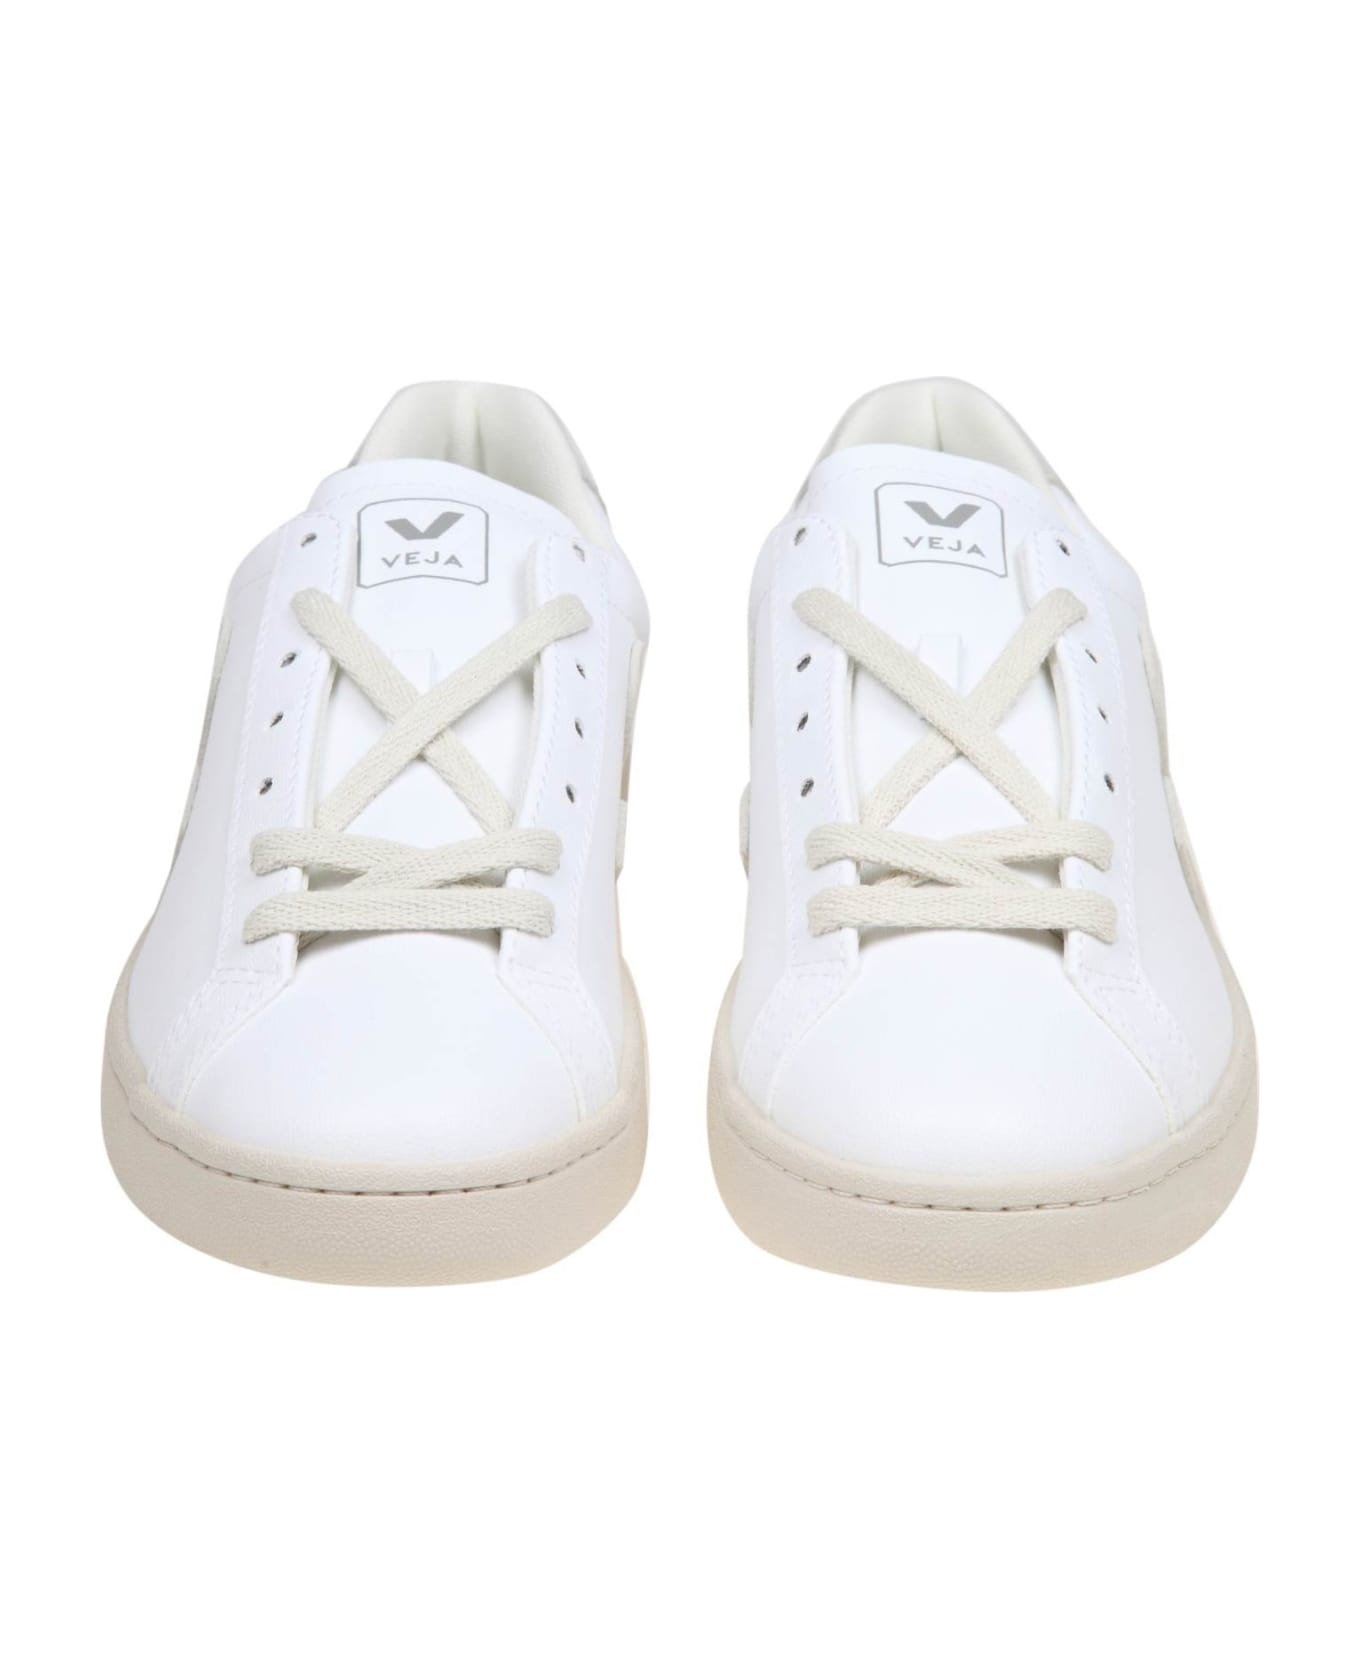 Veja Urca Sneakers In White Coated Cotton スニーカー